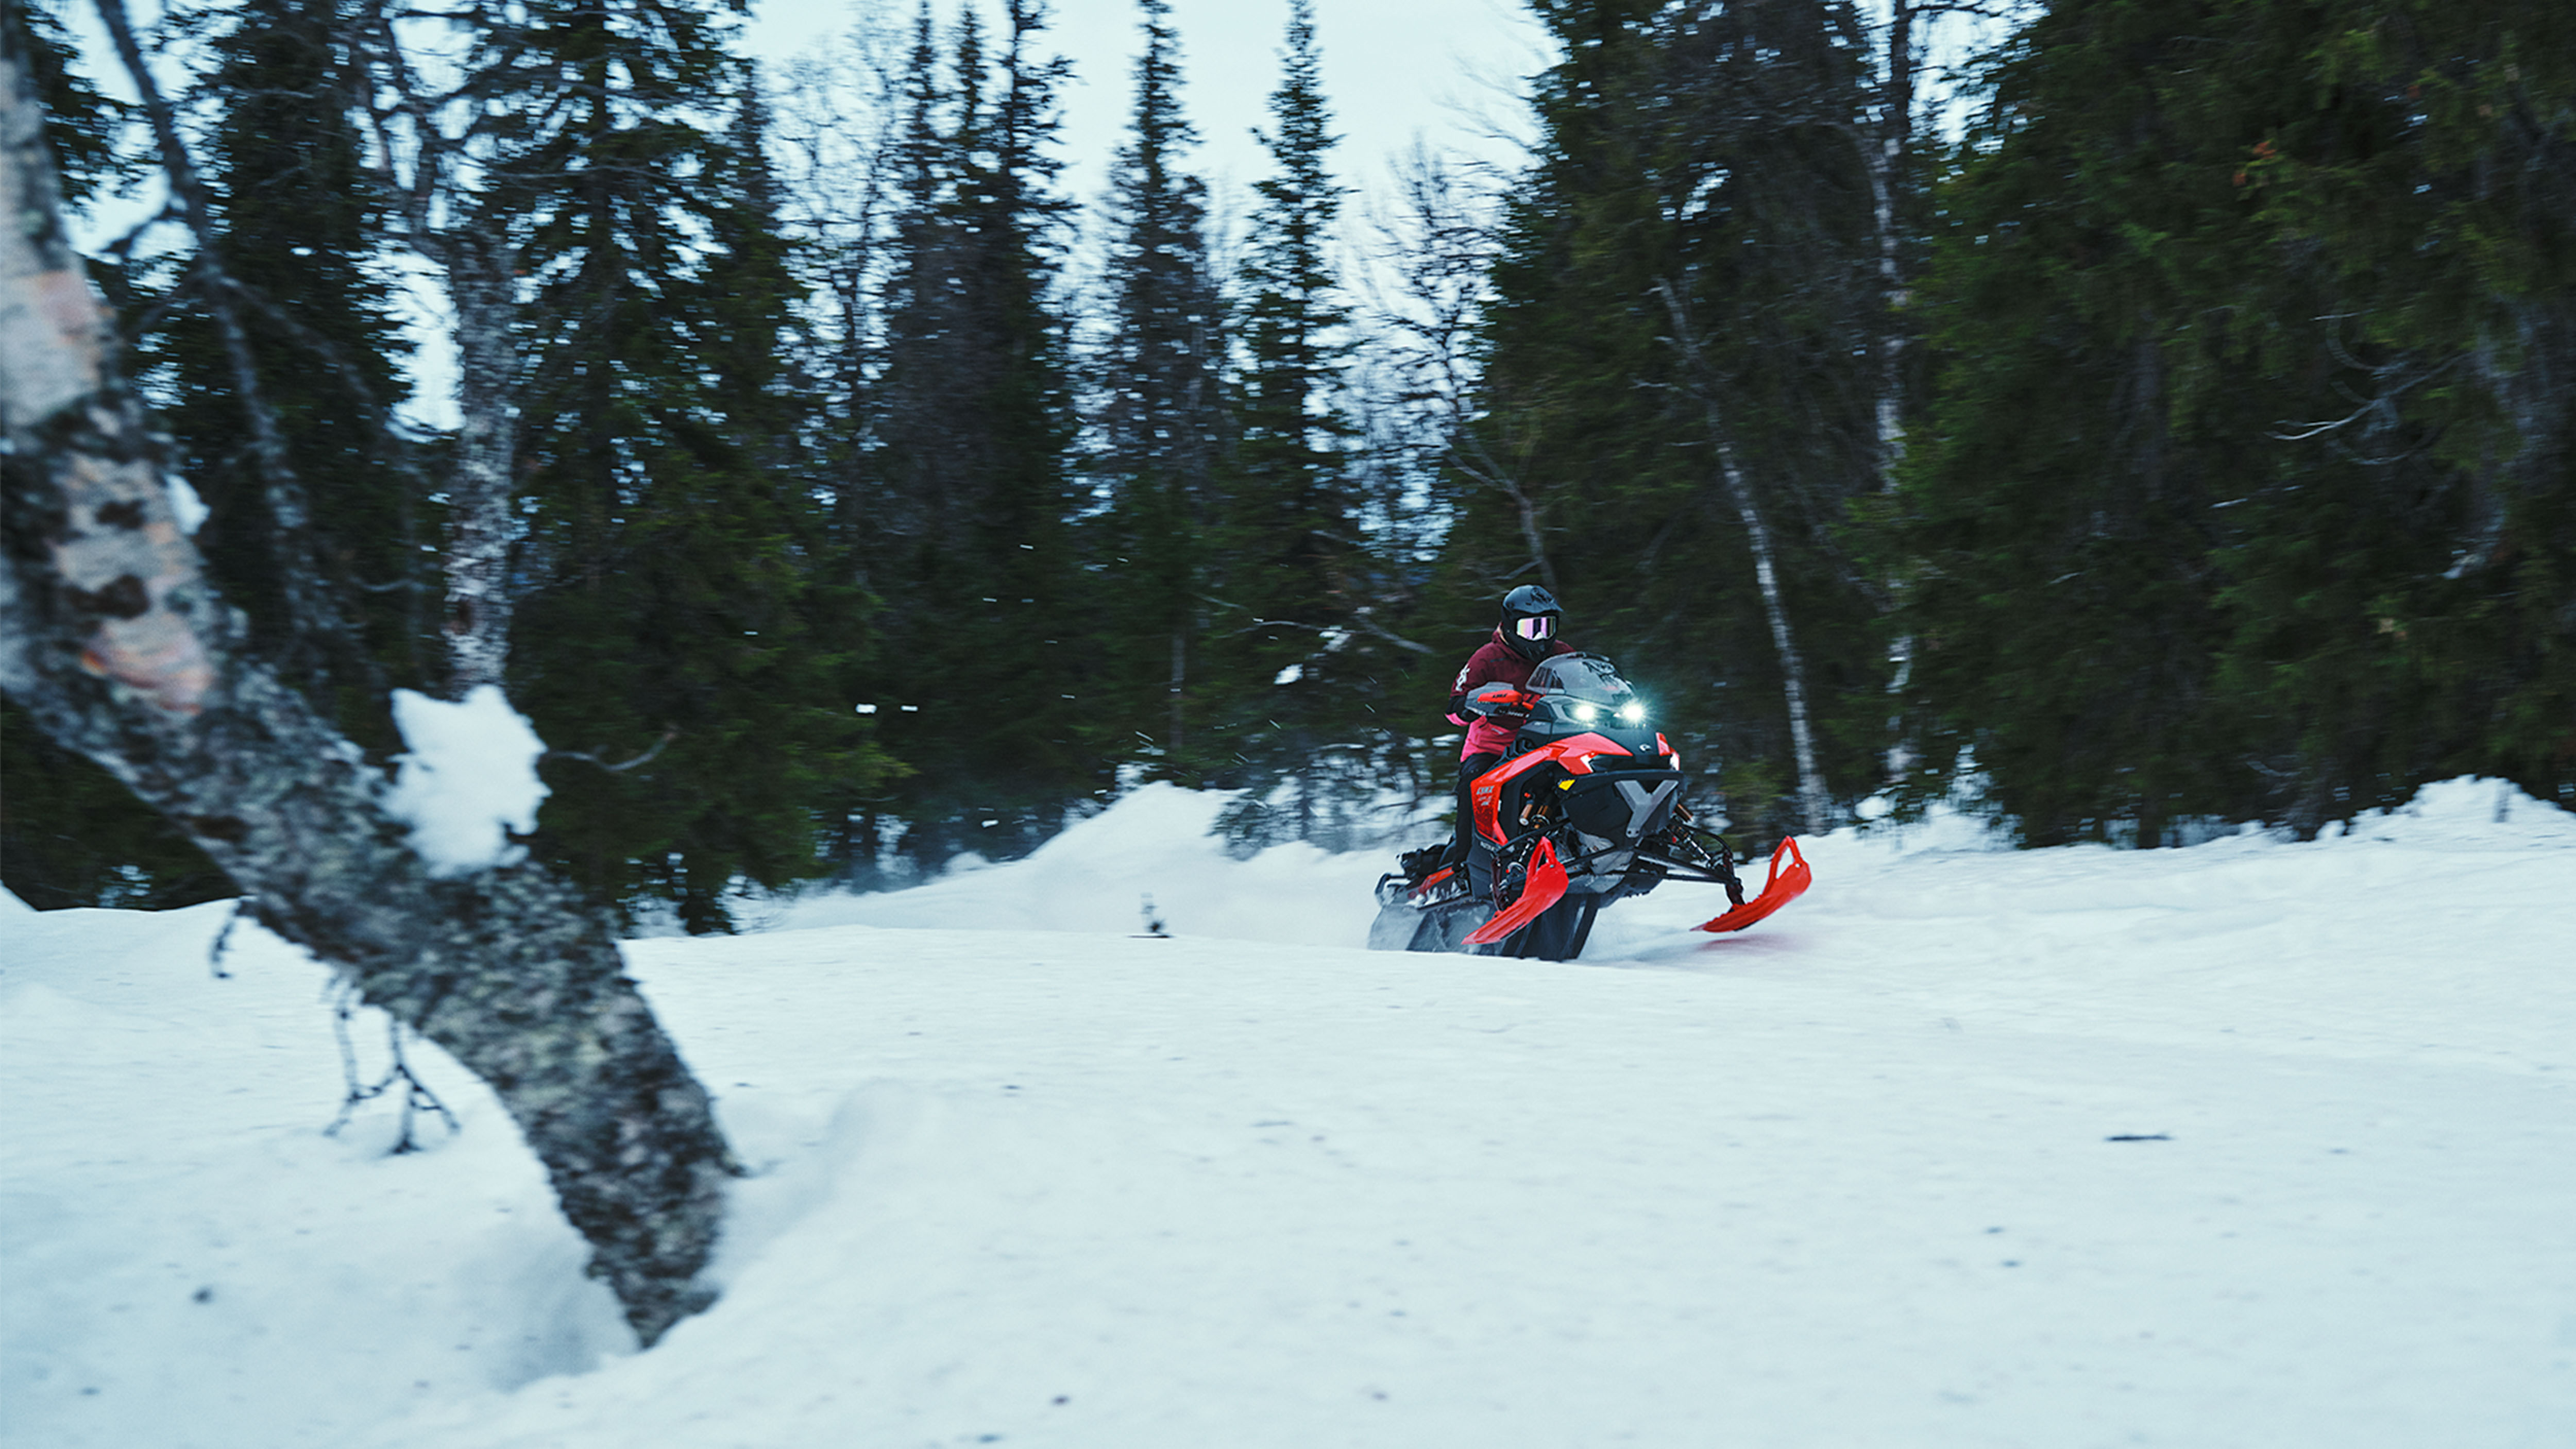 Lynx Rave RE 2025 snowmobile accelerating on trail